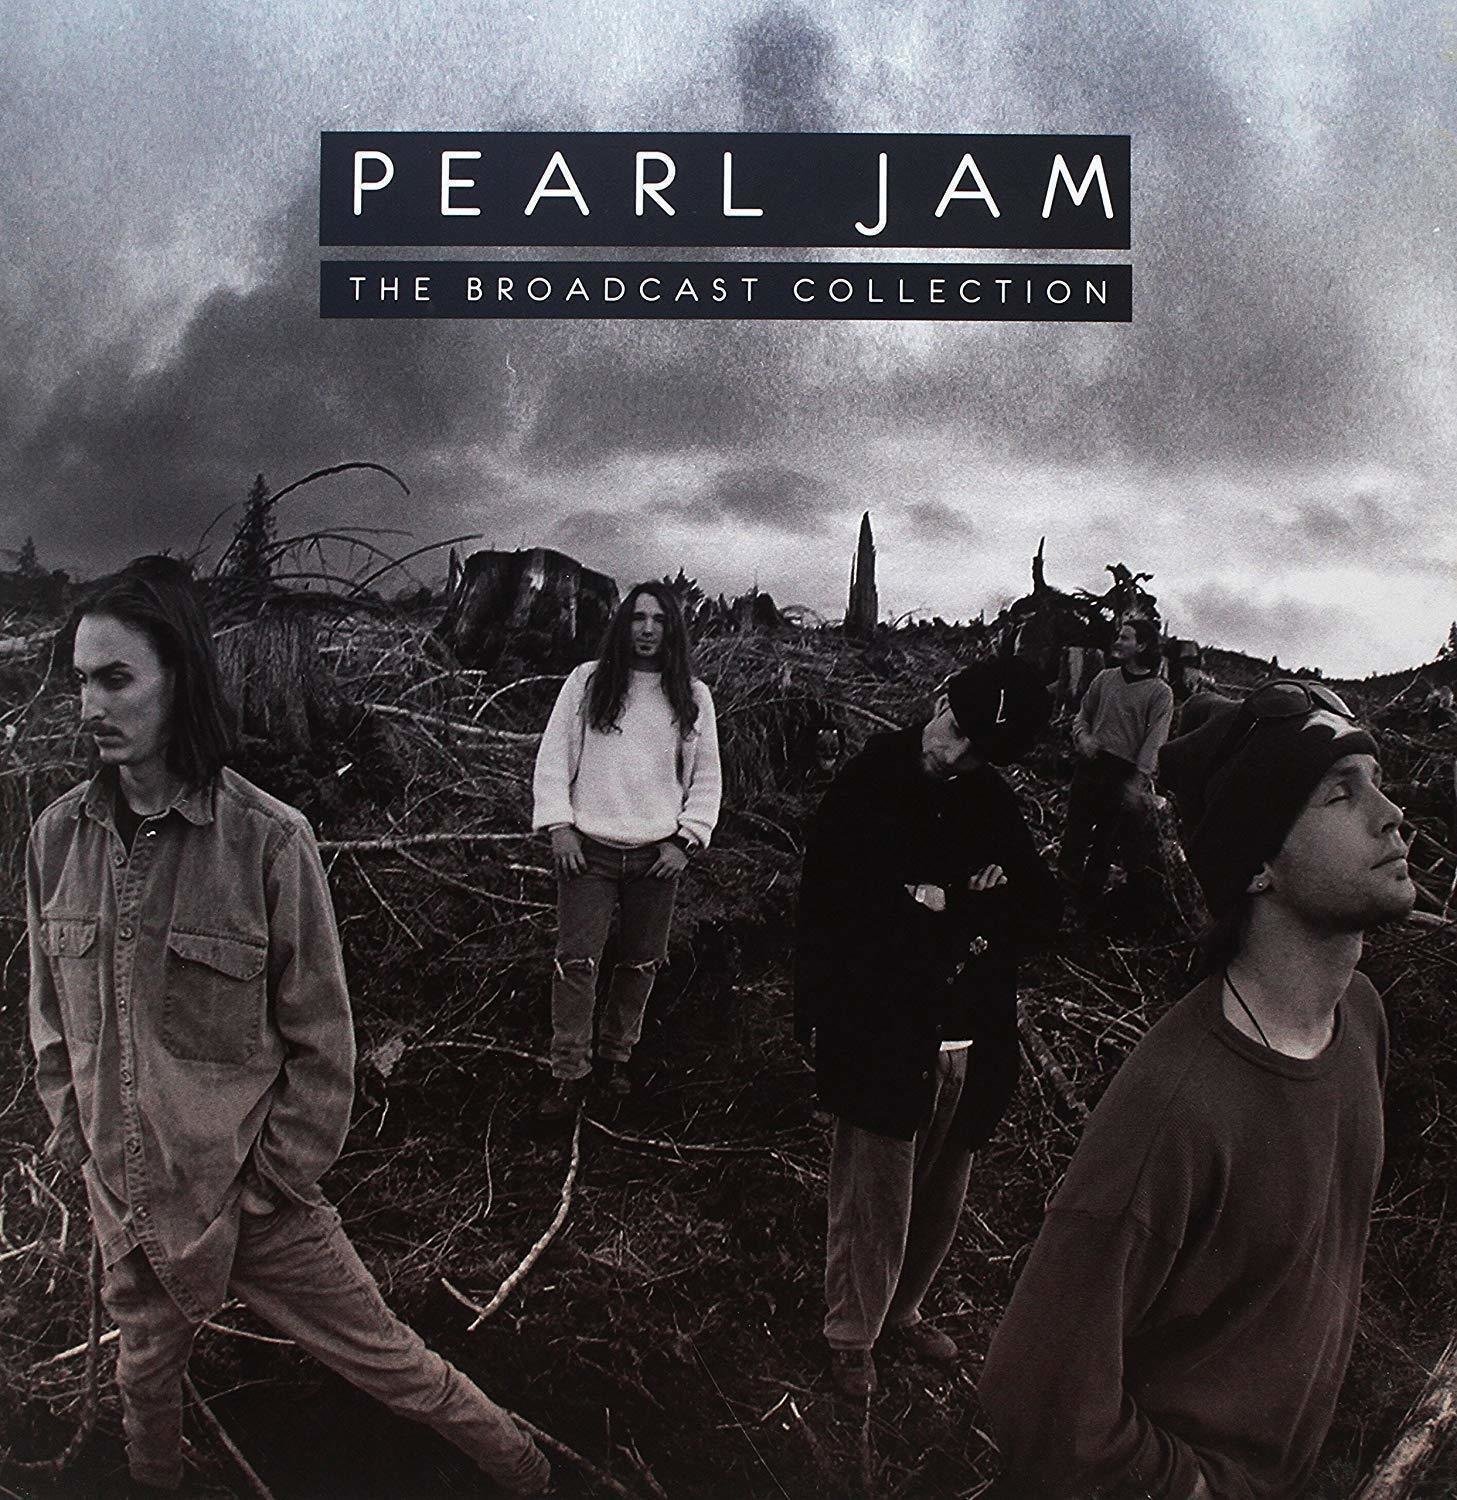 Vinylplade Pearl Jam - The Broadcast Collection (3 LP)